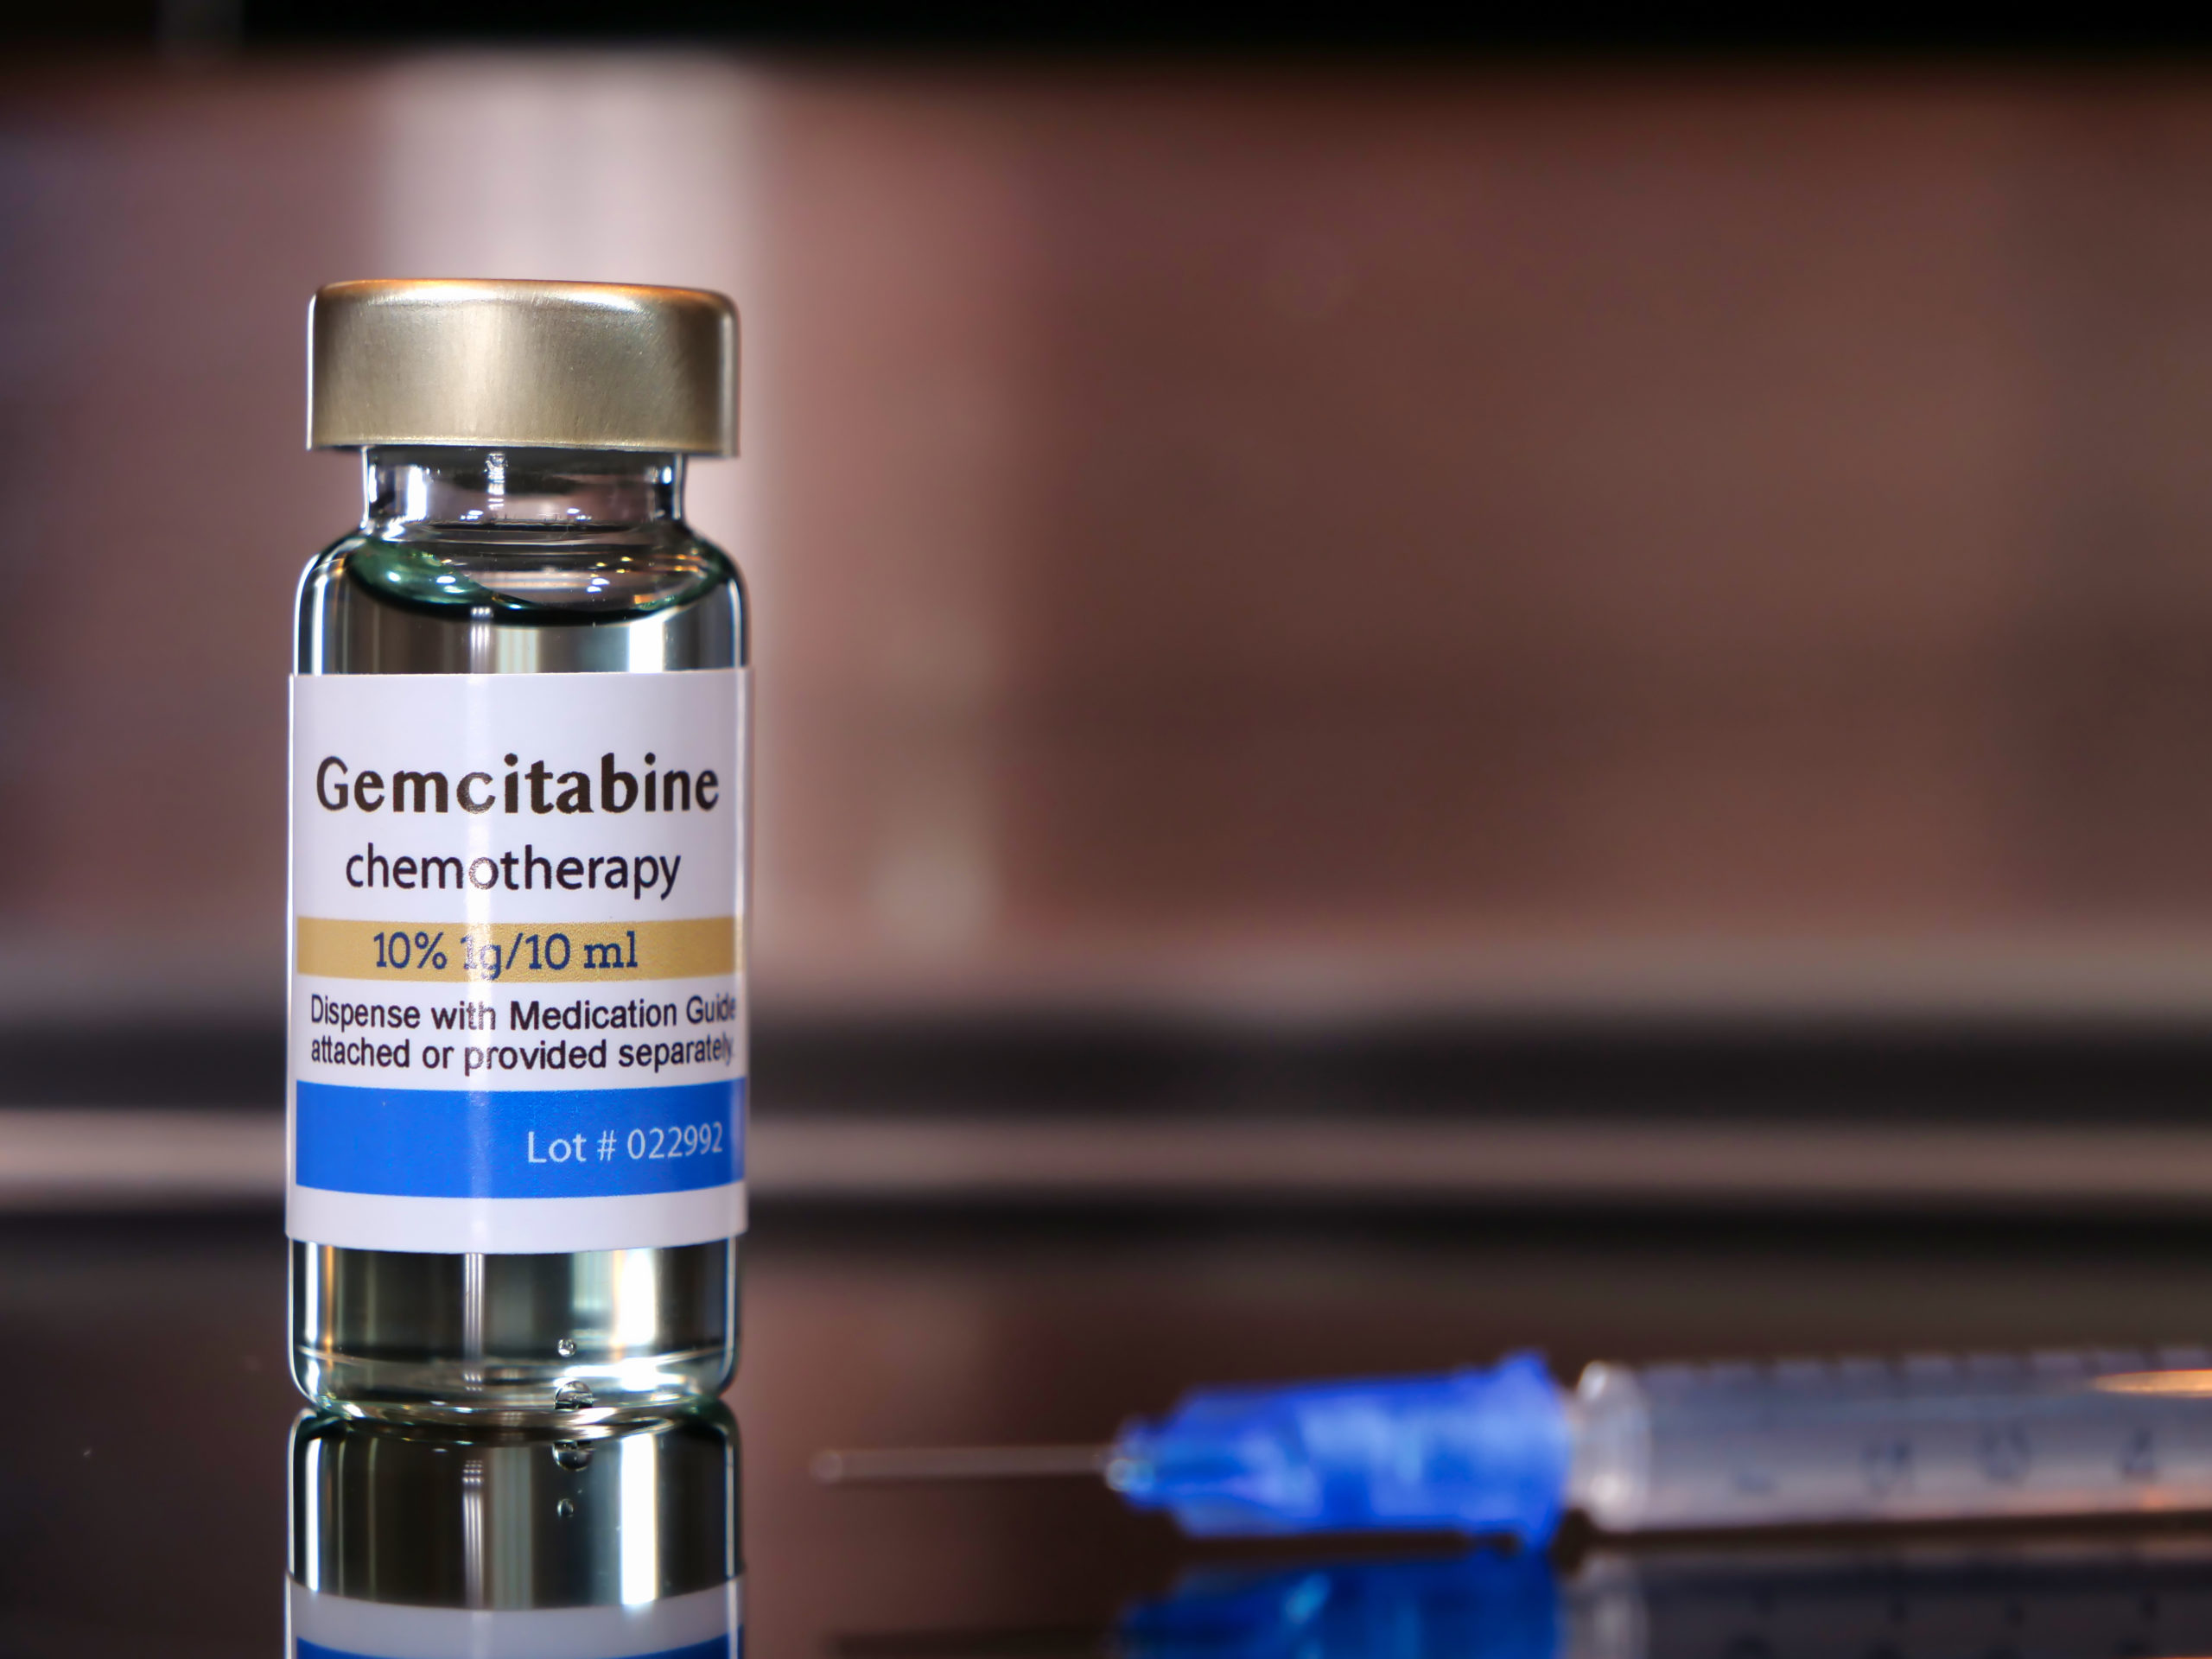 Gemcitabine Plus Docetaxel: An Effective Alternative to BCG Therapy for High-Risk NMIBC